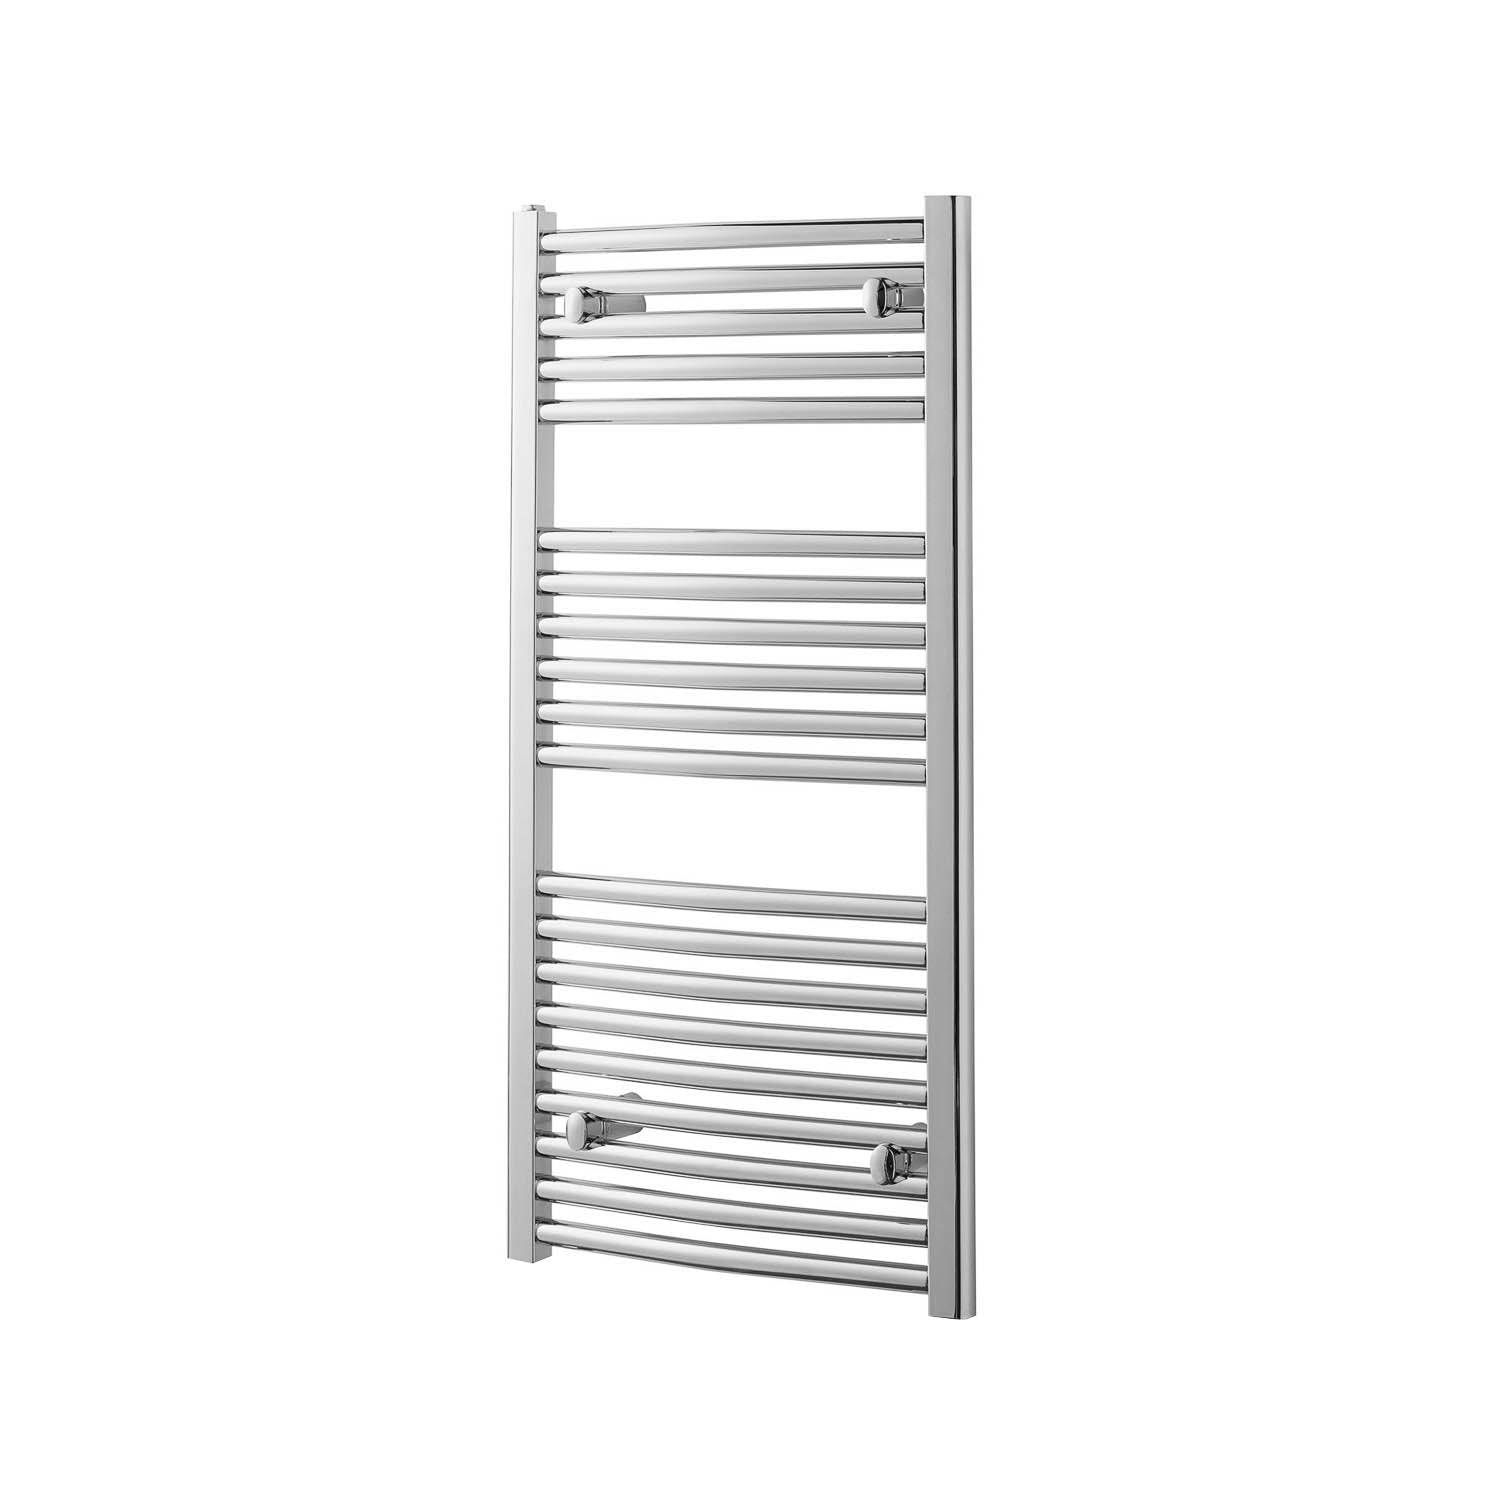 1200x500mm Modale Anti-Scald Towel Rail with a chrome finish on a white background